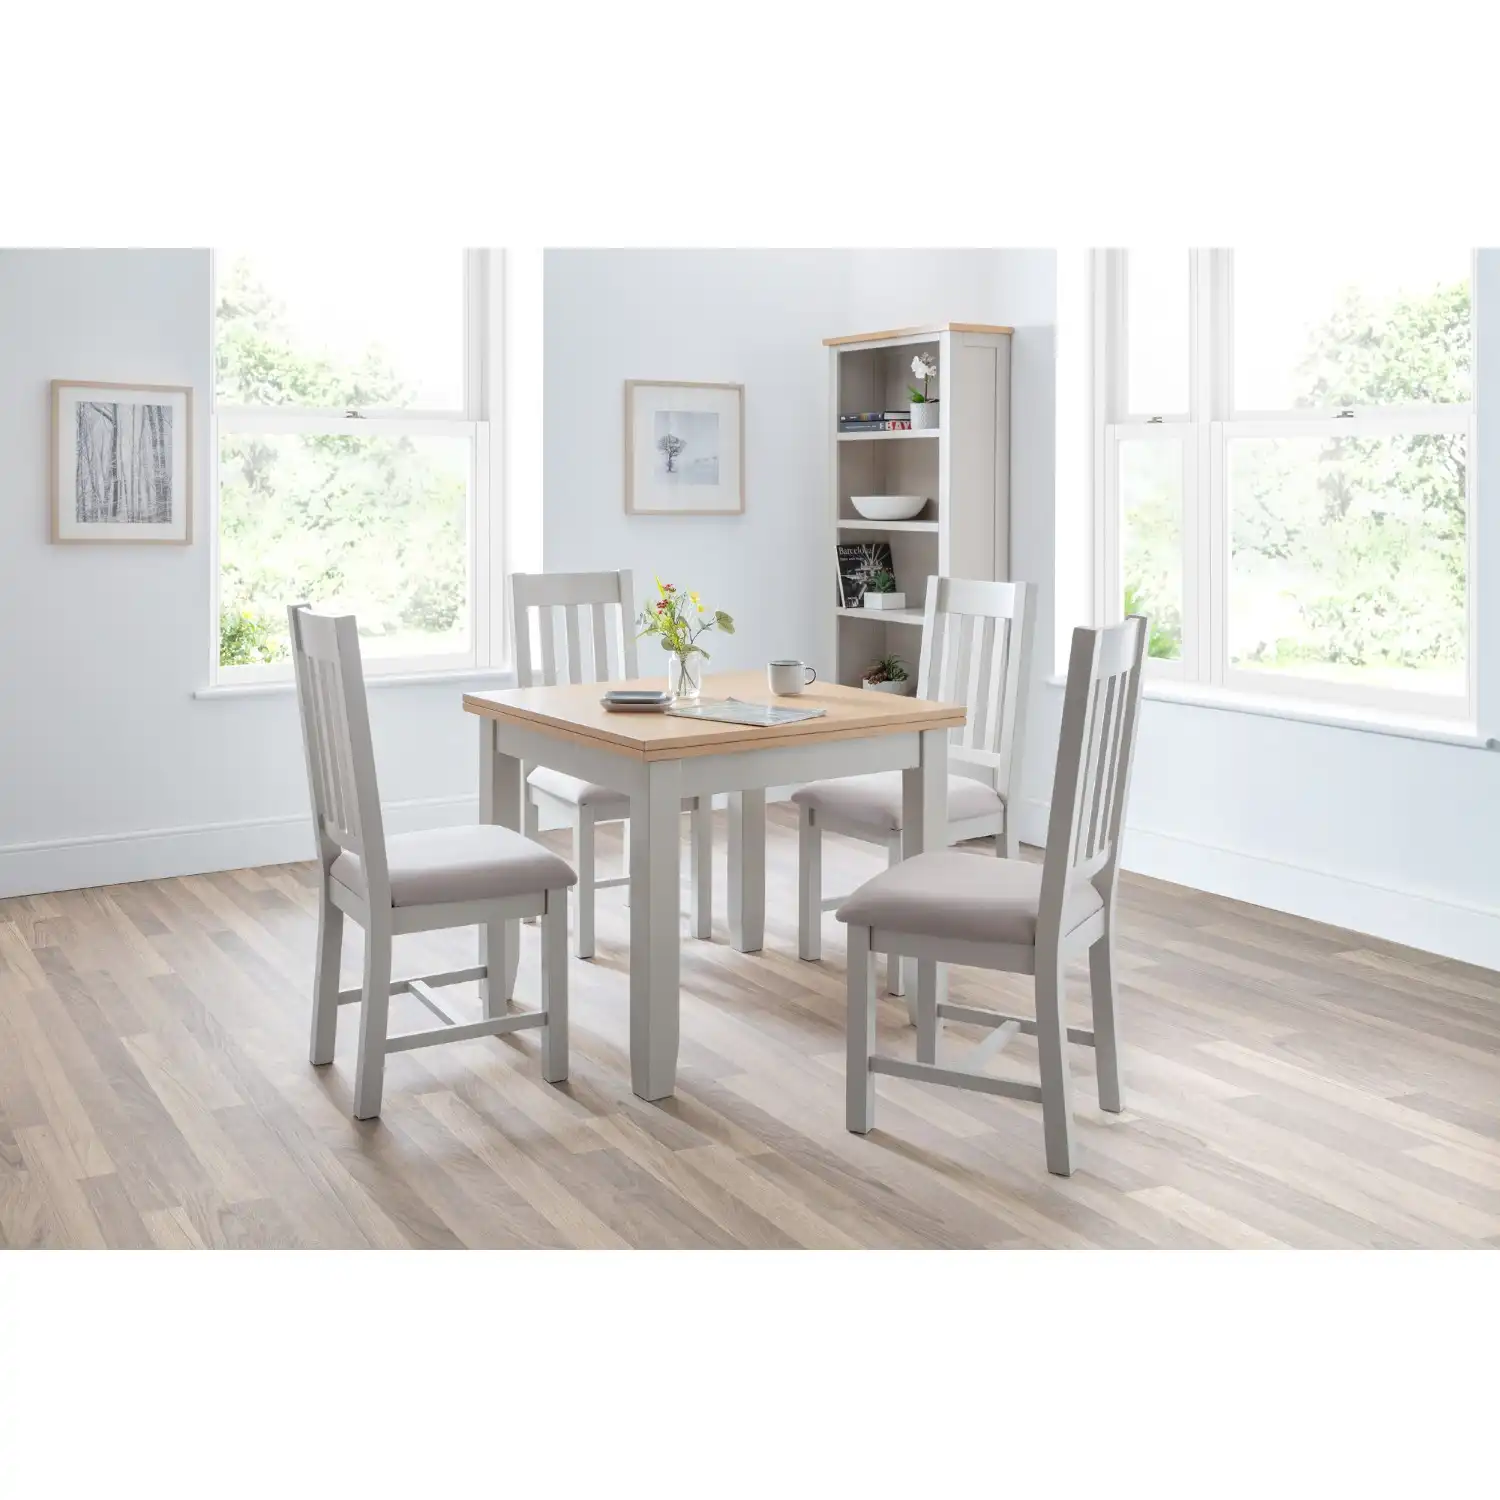 Grey Painted Oak Top Square Flip Top Extending Dining Table